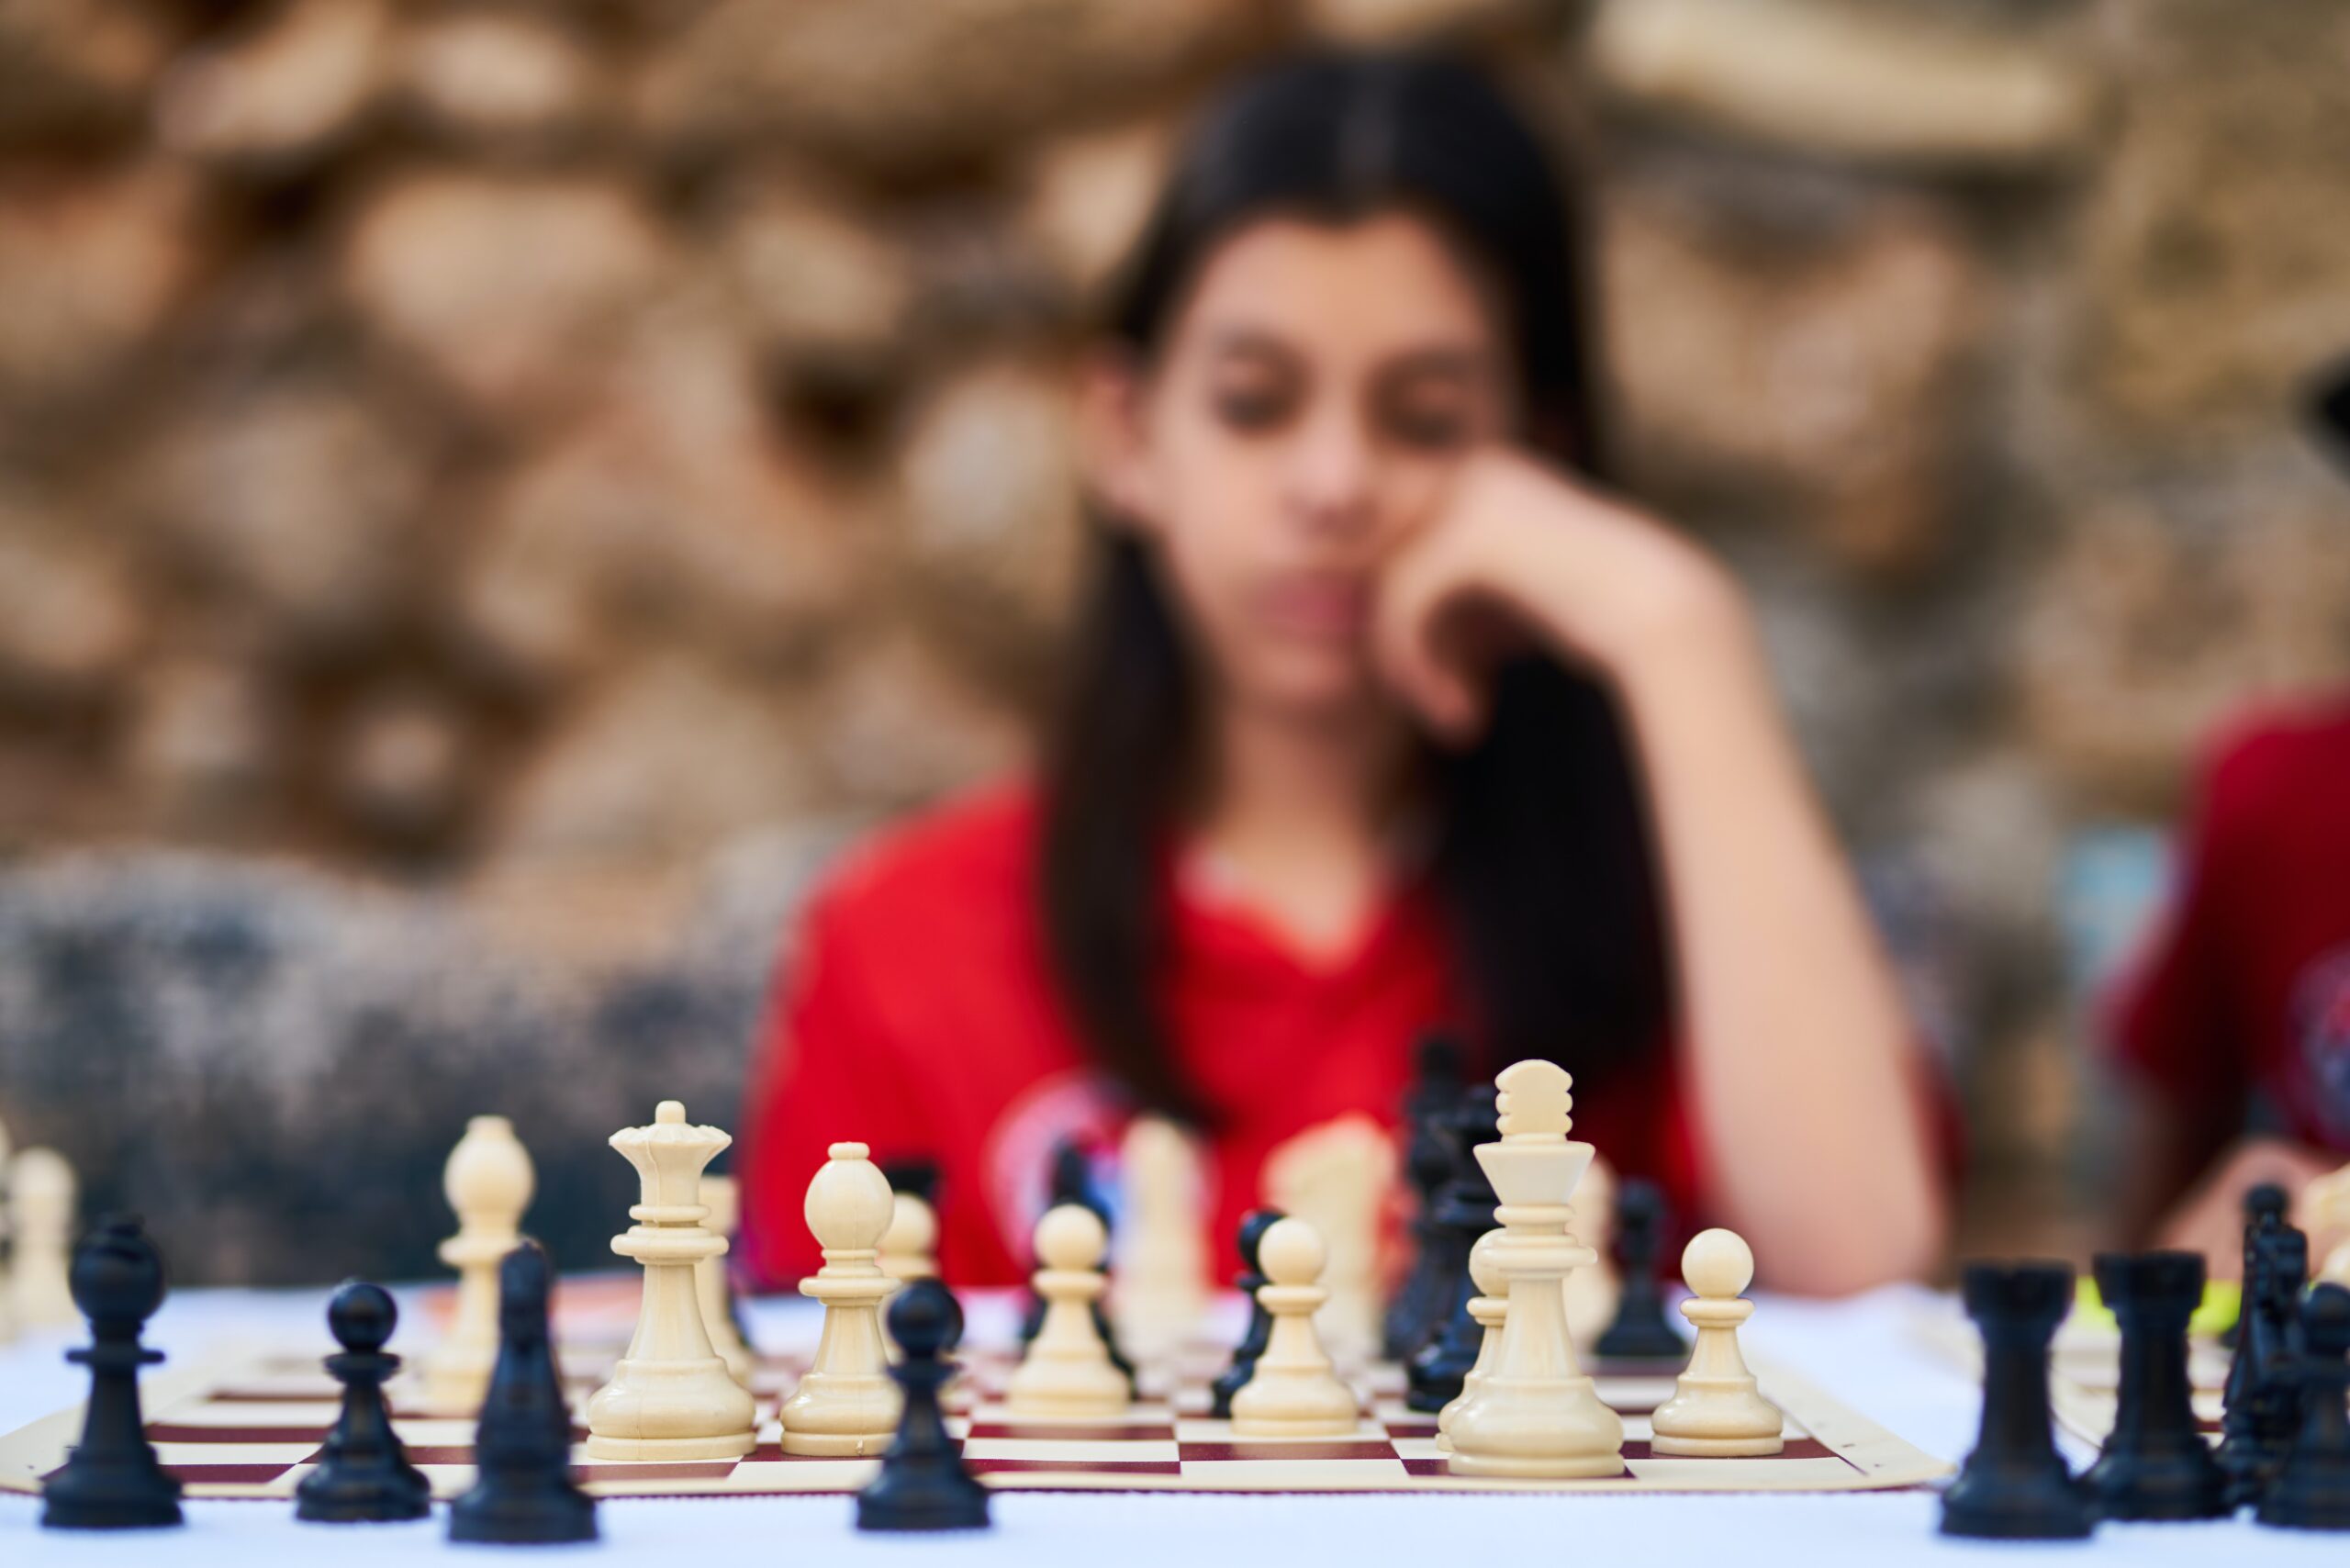 plan strategically to improve in chess